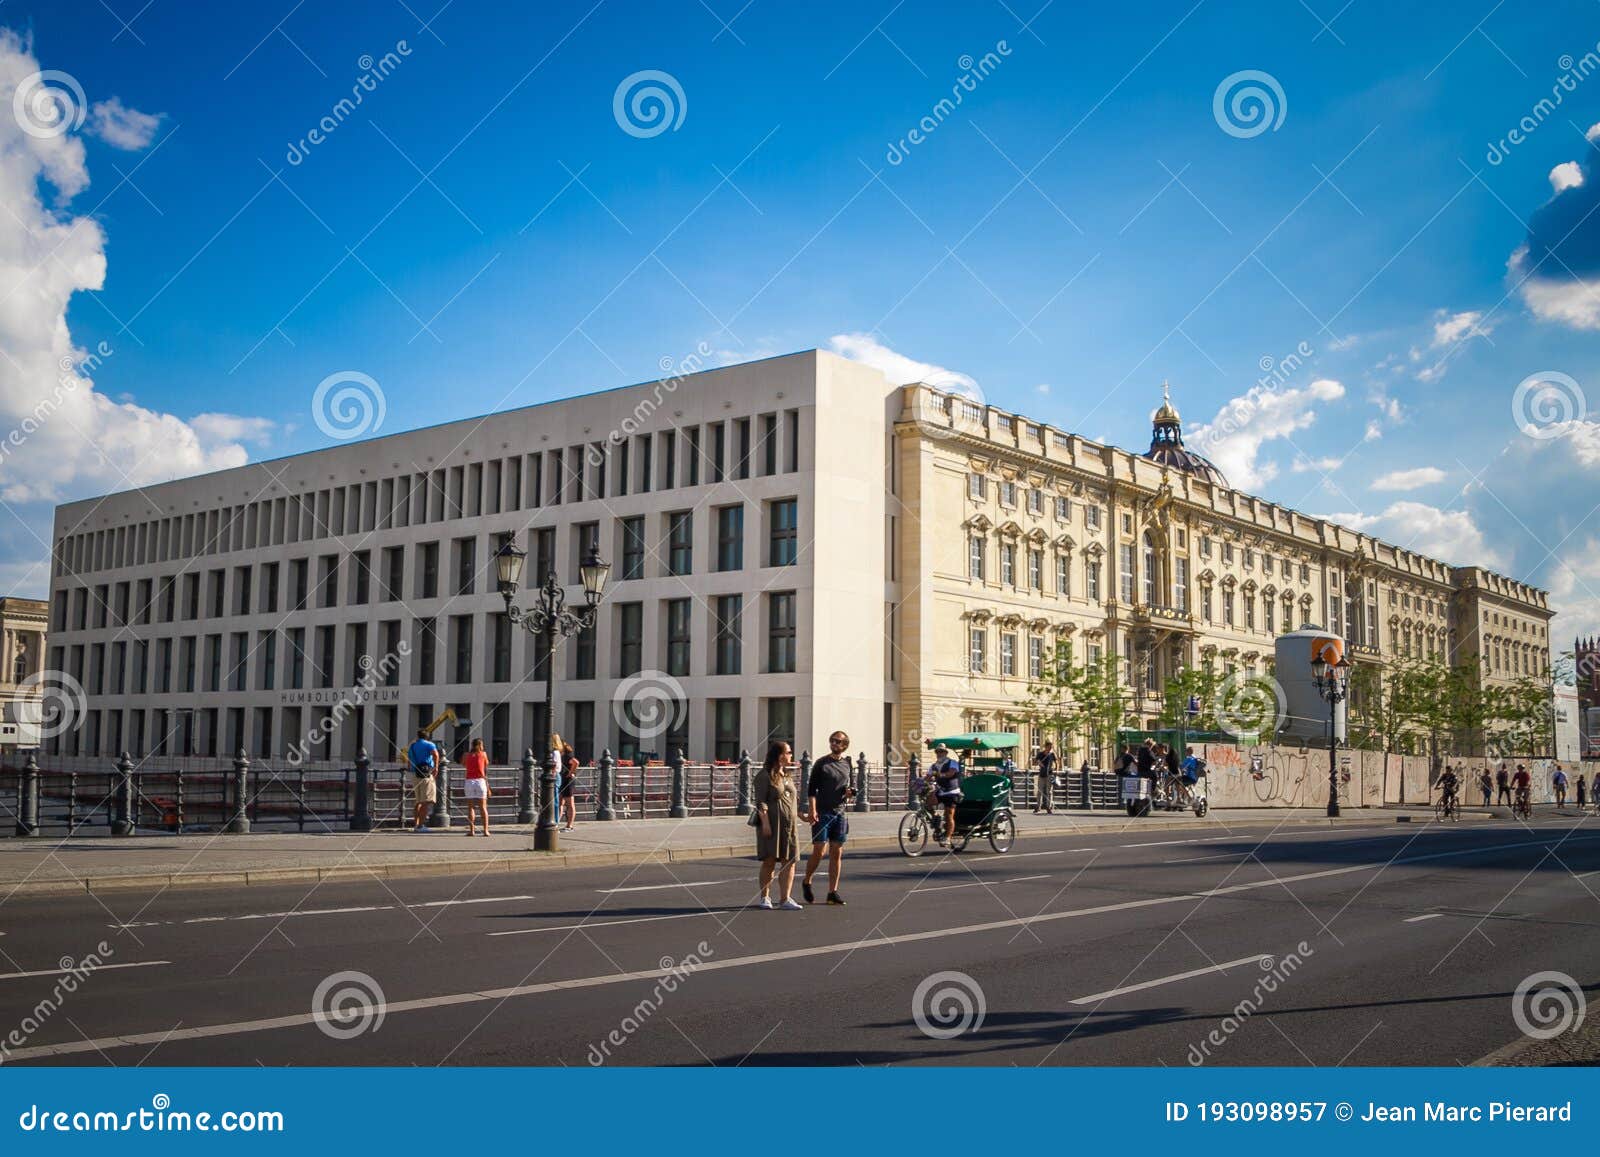 Germany The Humboldt Forum In Berlin Editorial Photography Image Of Ethnology Forum 193098957